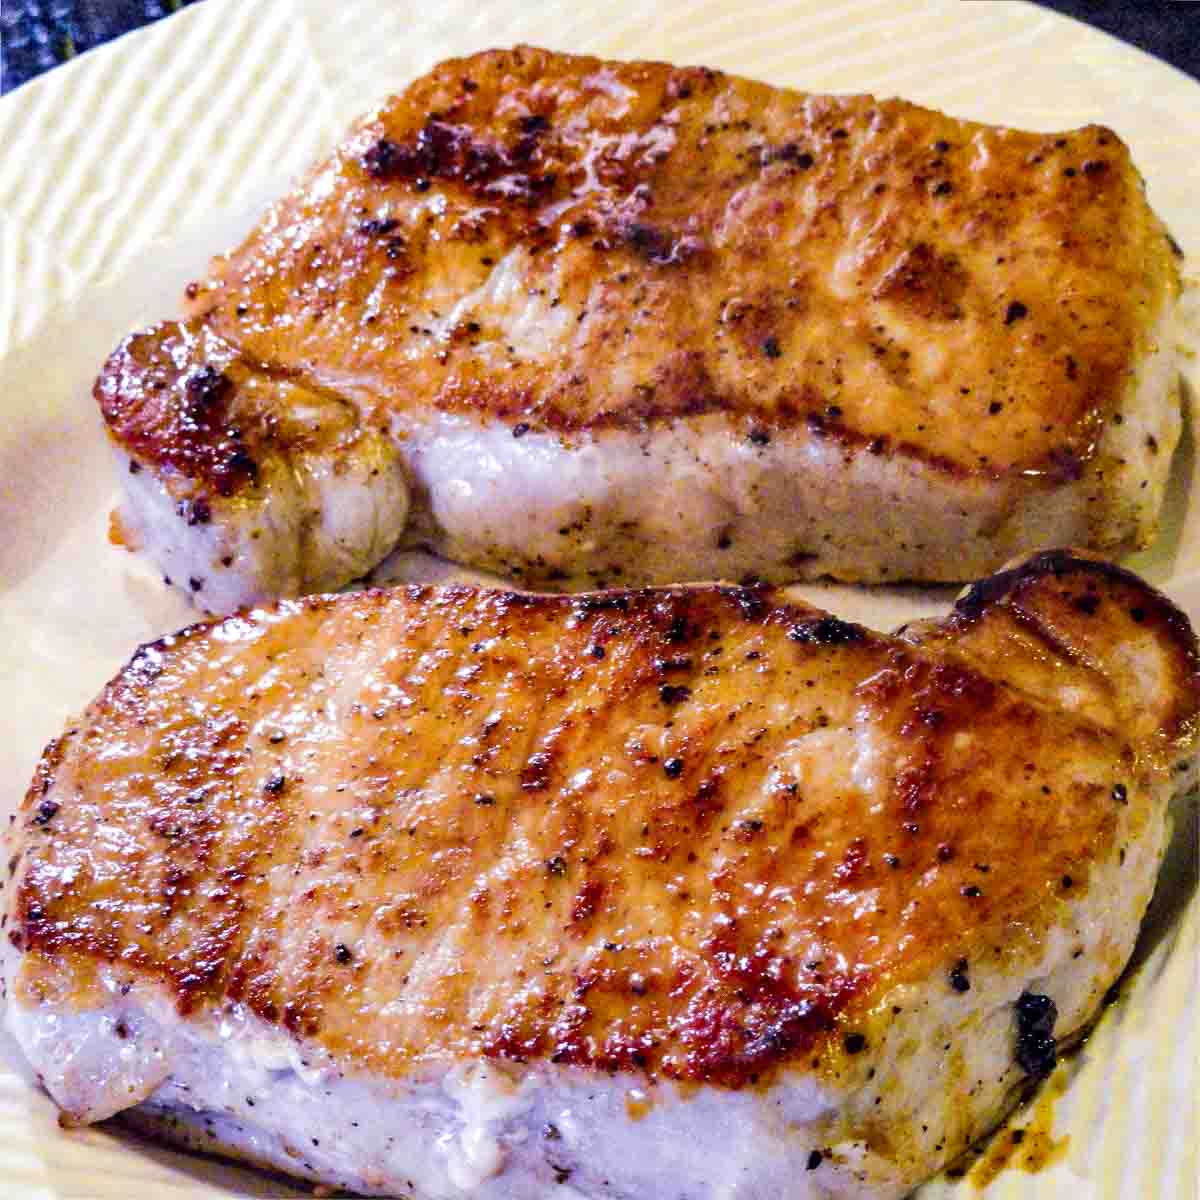 Picture of two roasted Pork Chops on an off white plate